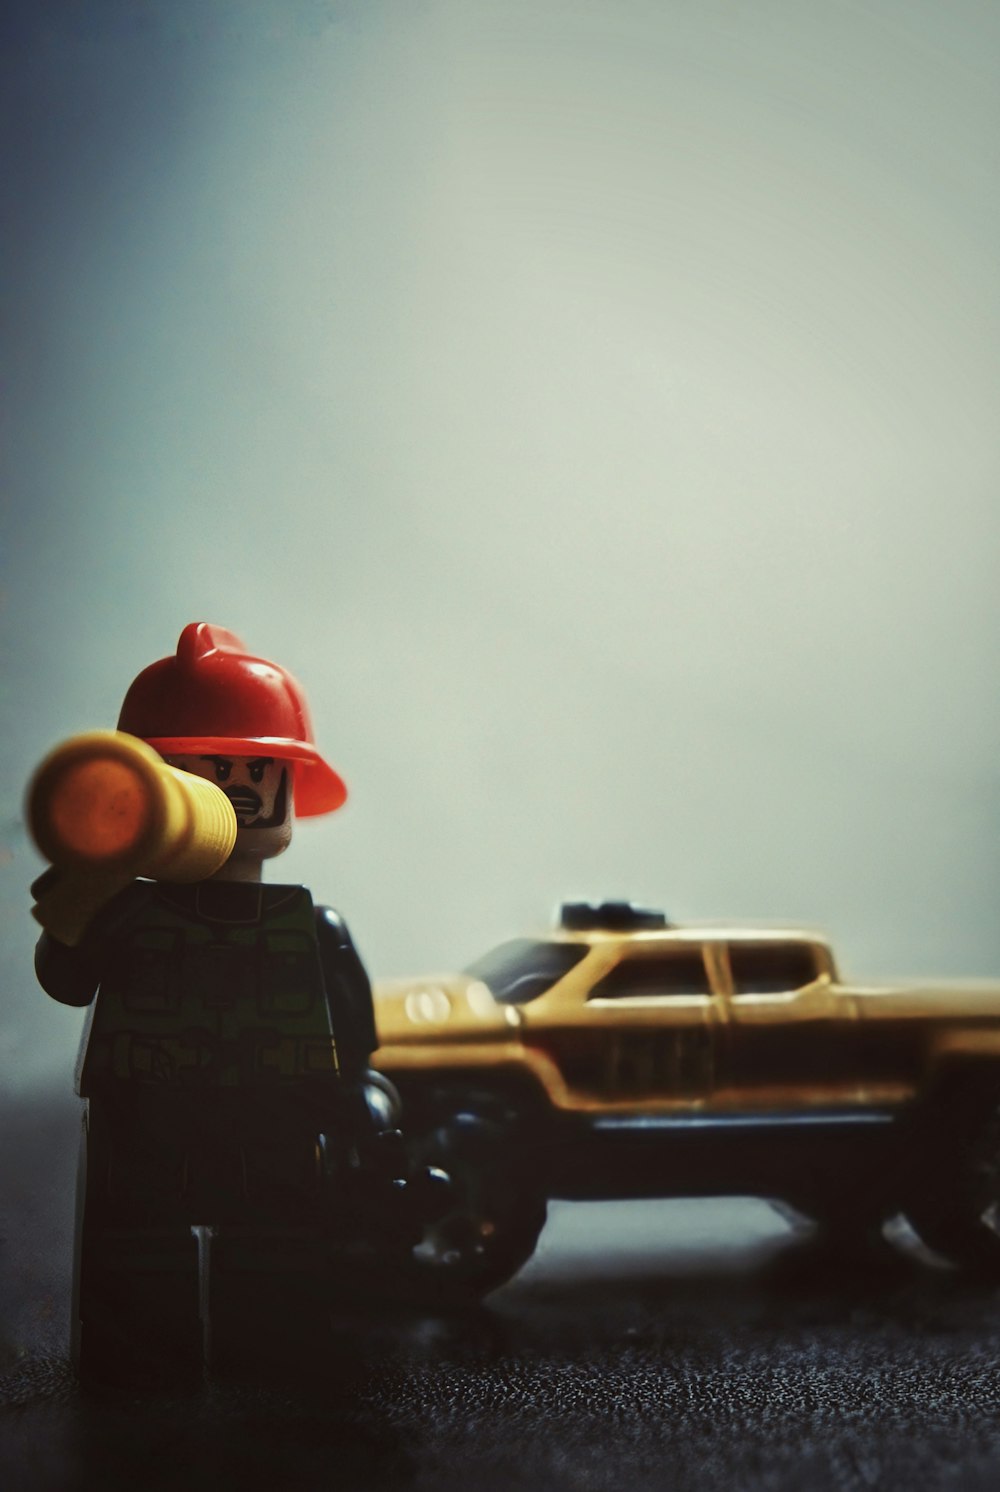 a toy fireman next to a toy truck